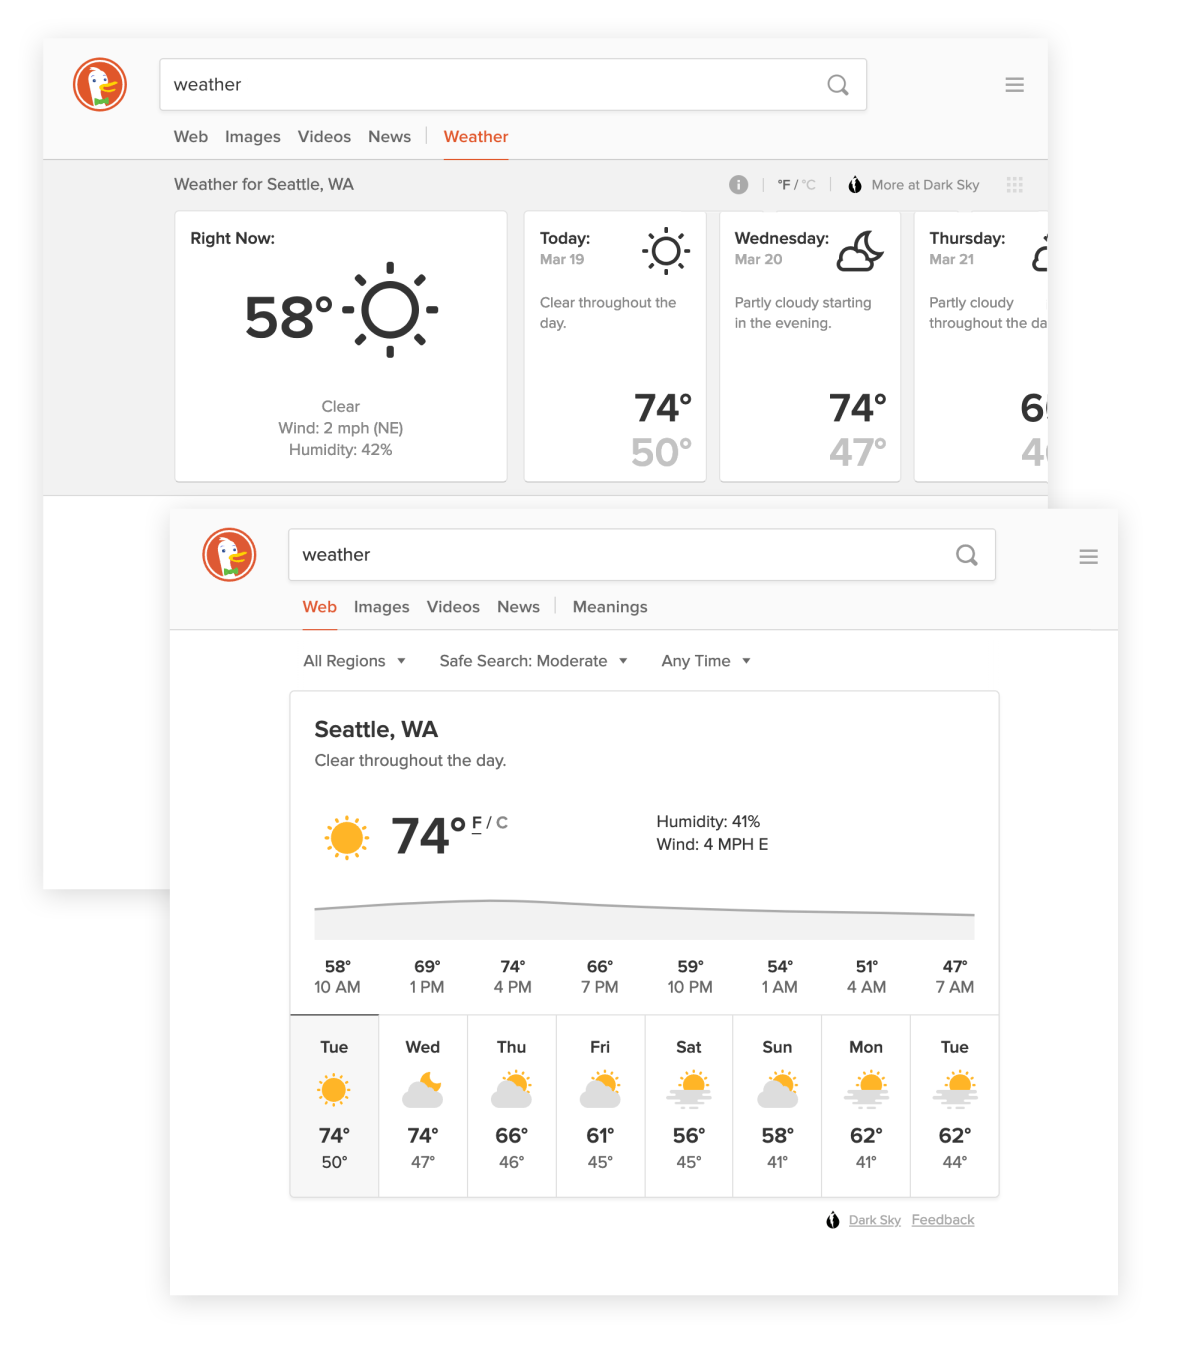 DuckDuckGo search result for 'weather', showing the old and new weather displays.